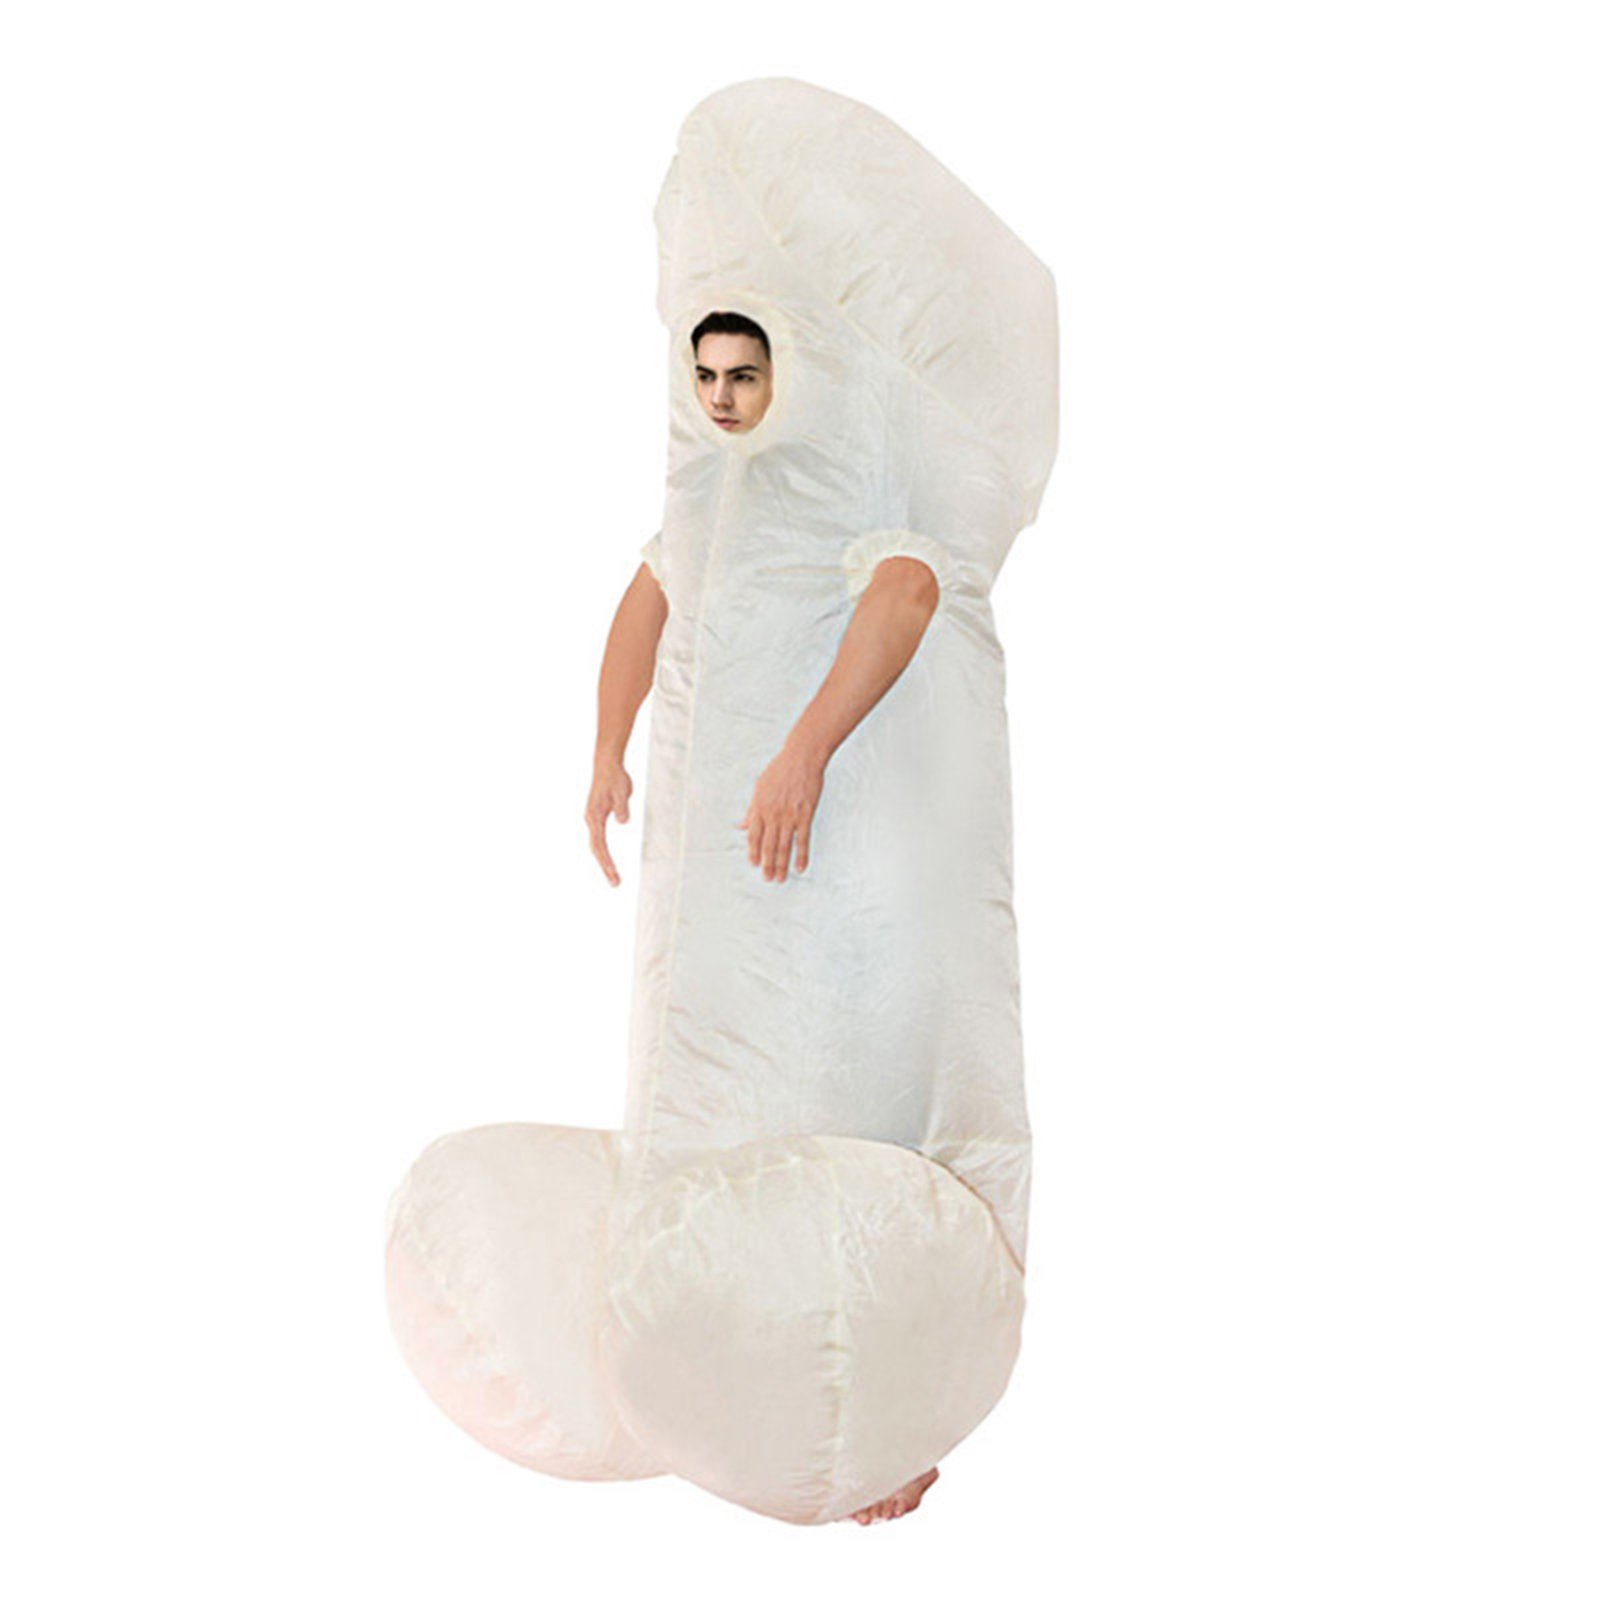 Blow-Up Willy Adult Unisex Smiffys Fancy Dress Decorations 